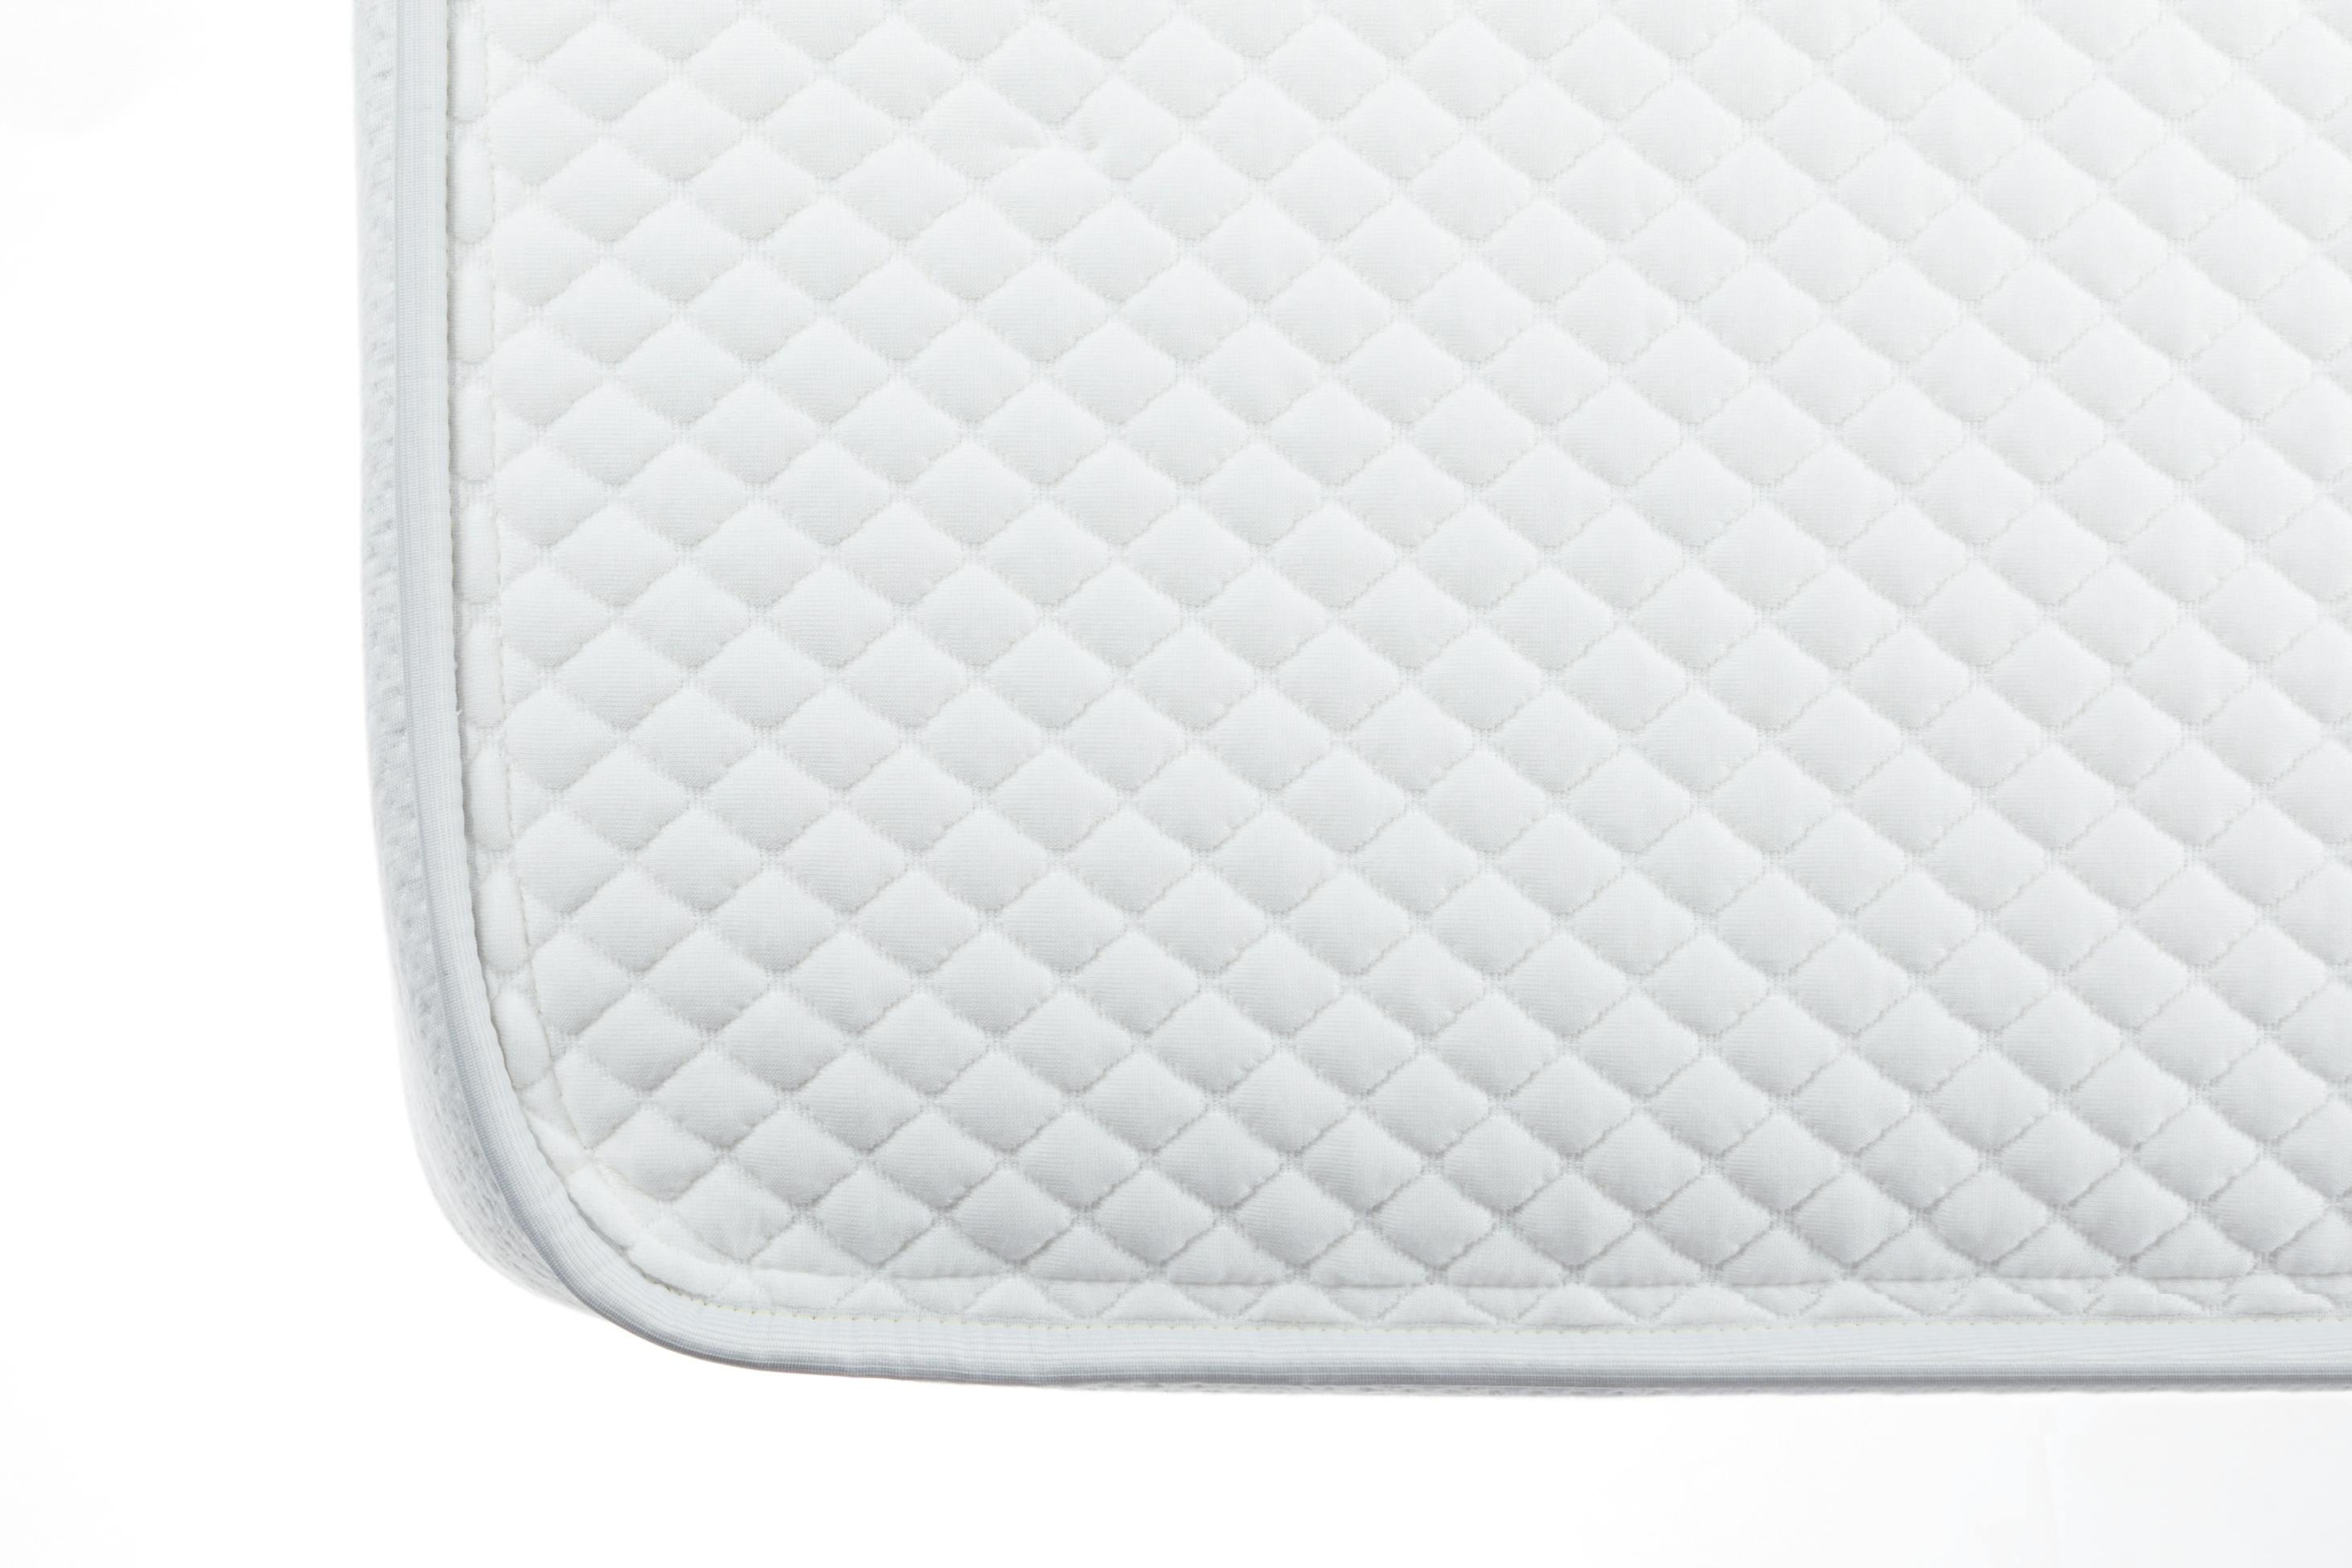 Top Corner View of Thuma The Mattress Product